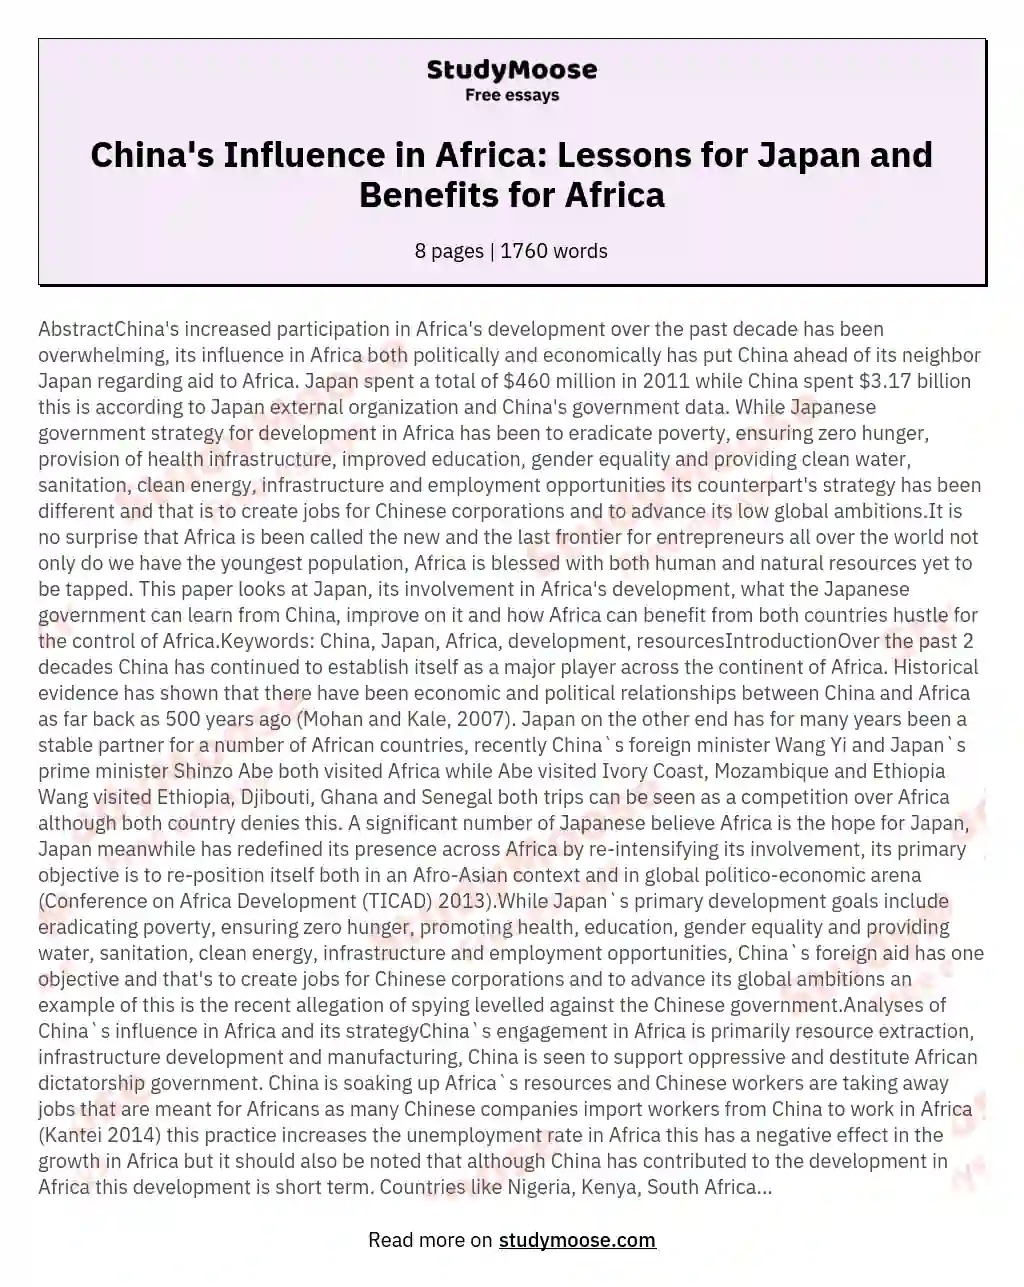 China's Influence in Africa: Lessons for Japan and Benefits for Africa